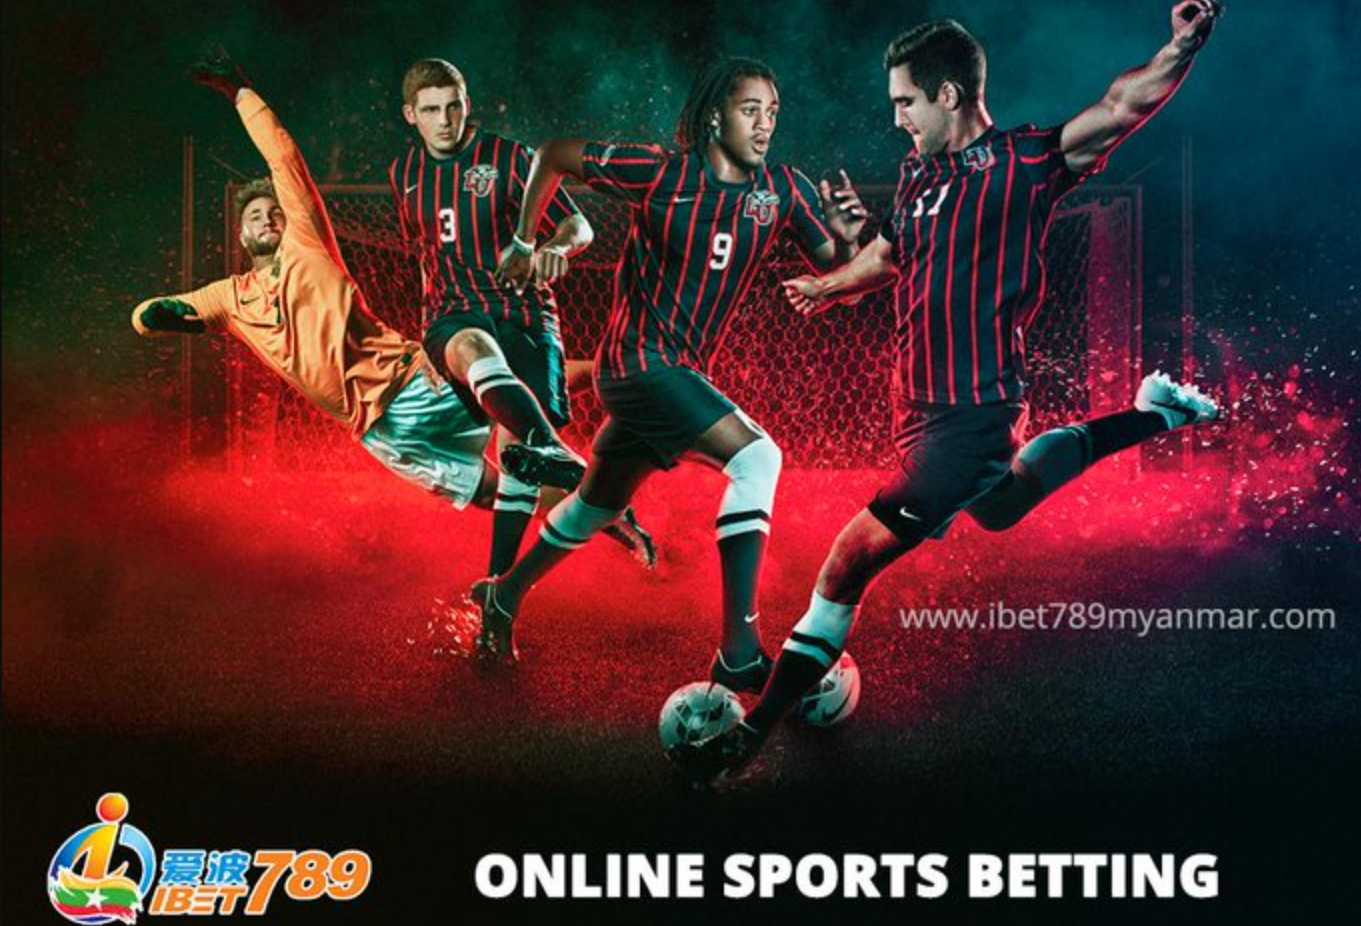 How to create an account at the company iBet789 in Cambodia